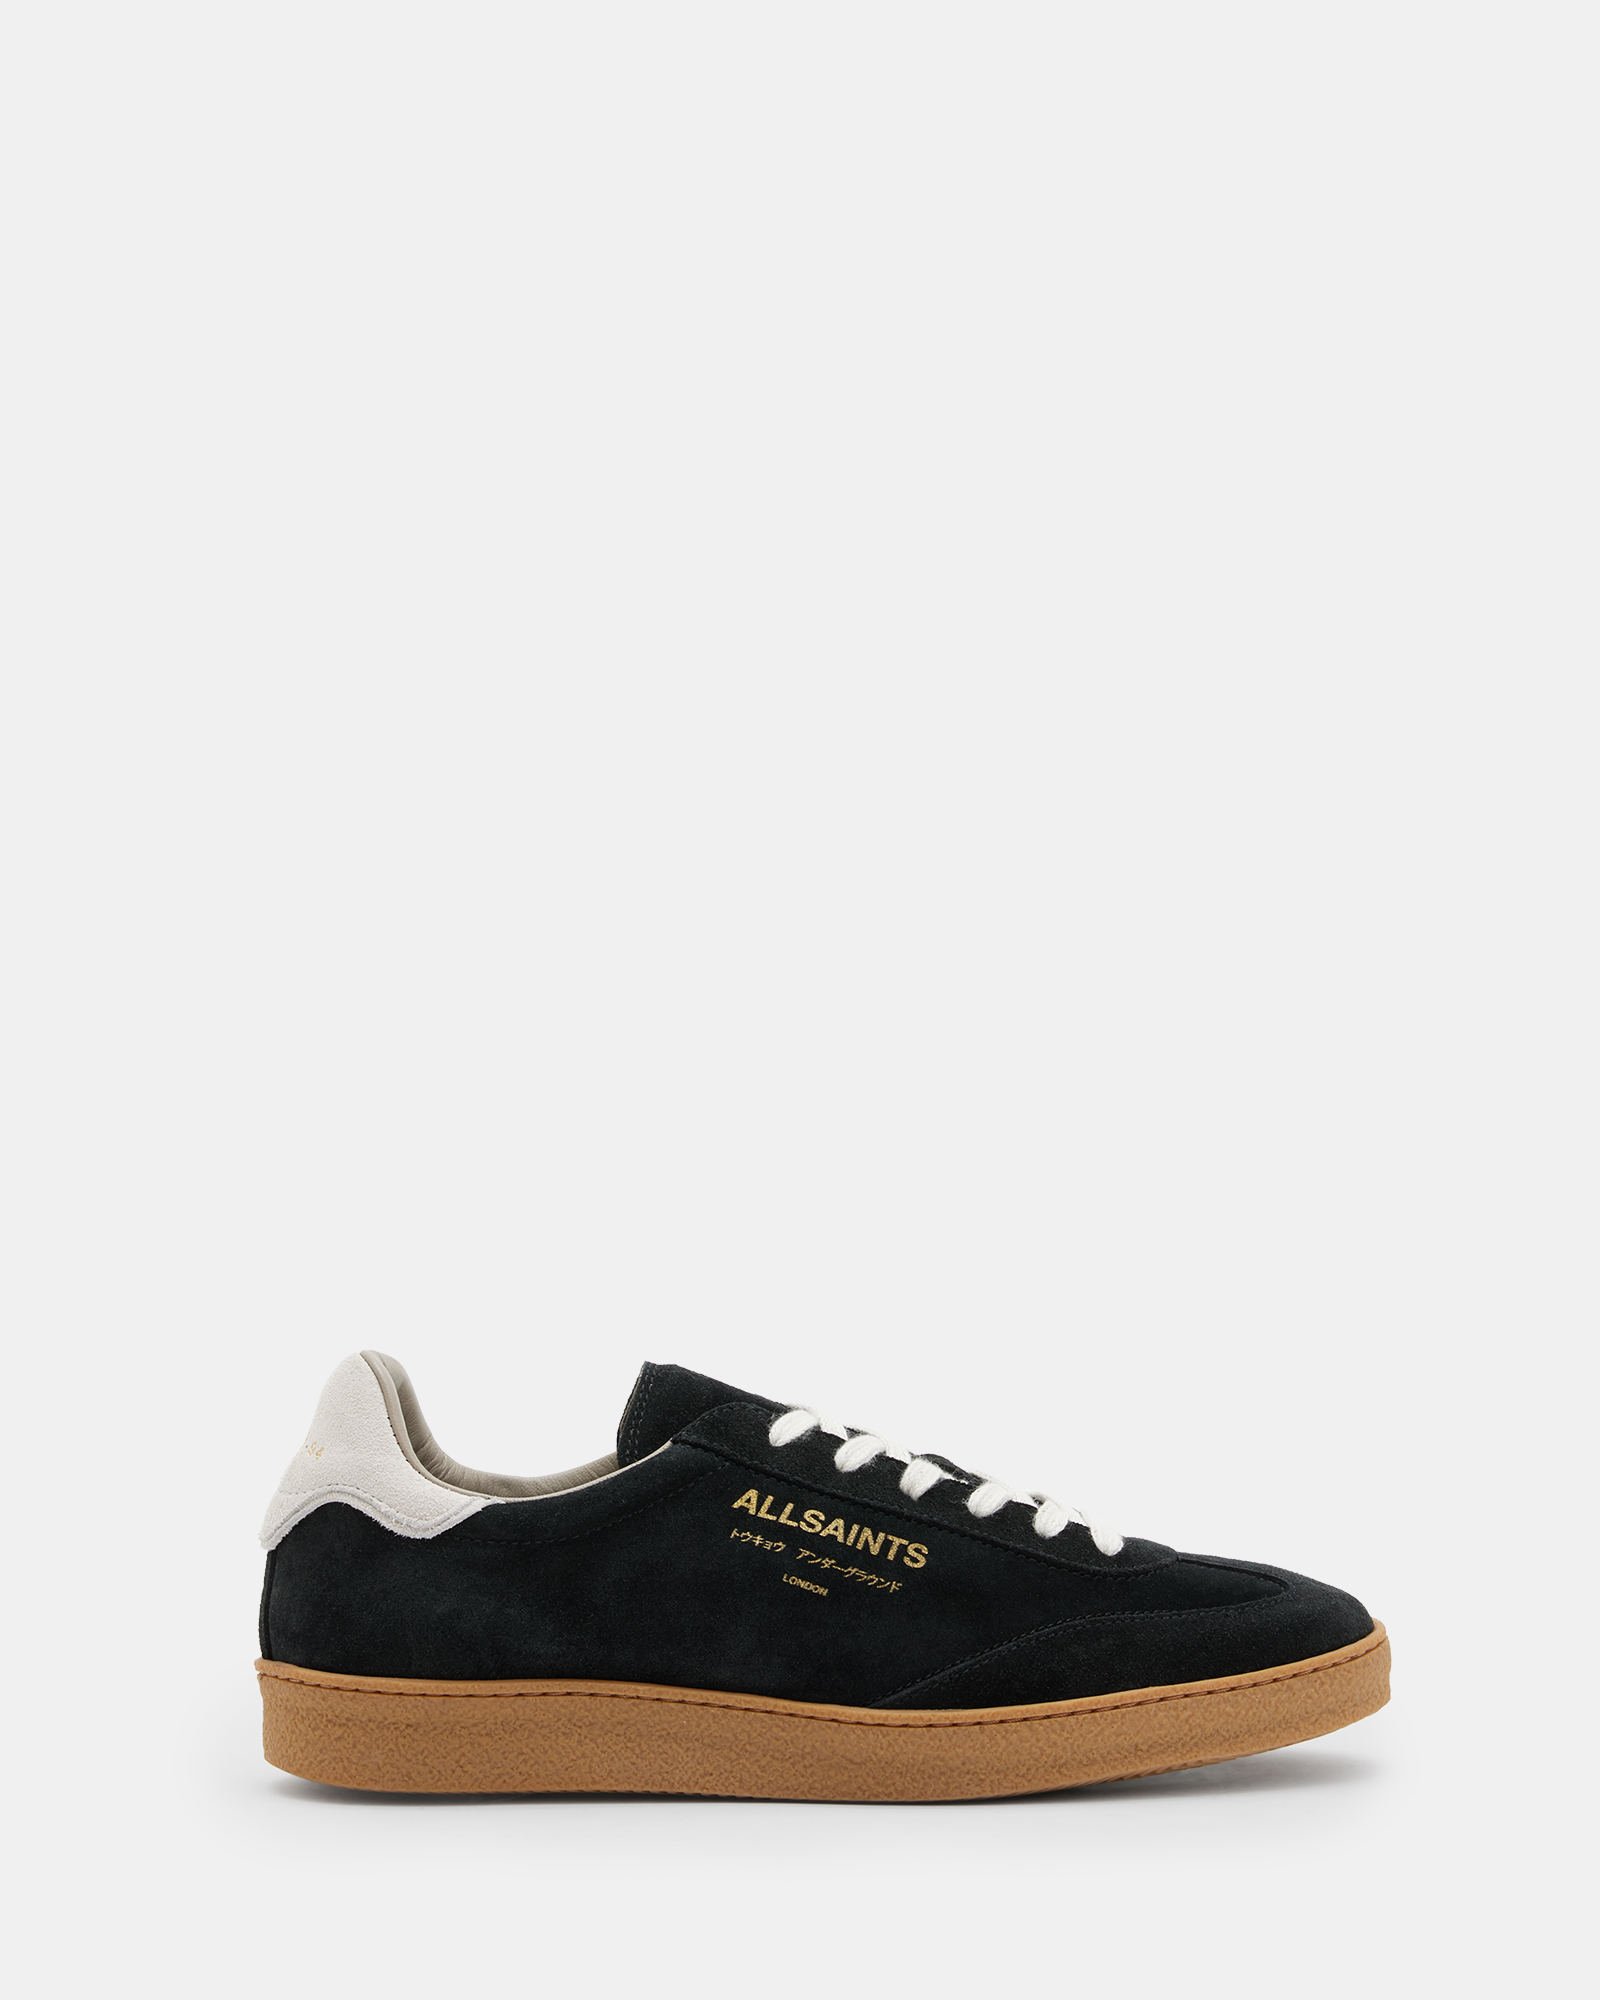 AllSaints Thelma Suede Low Top Trainers,, Black/White